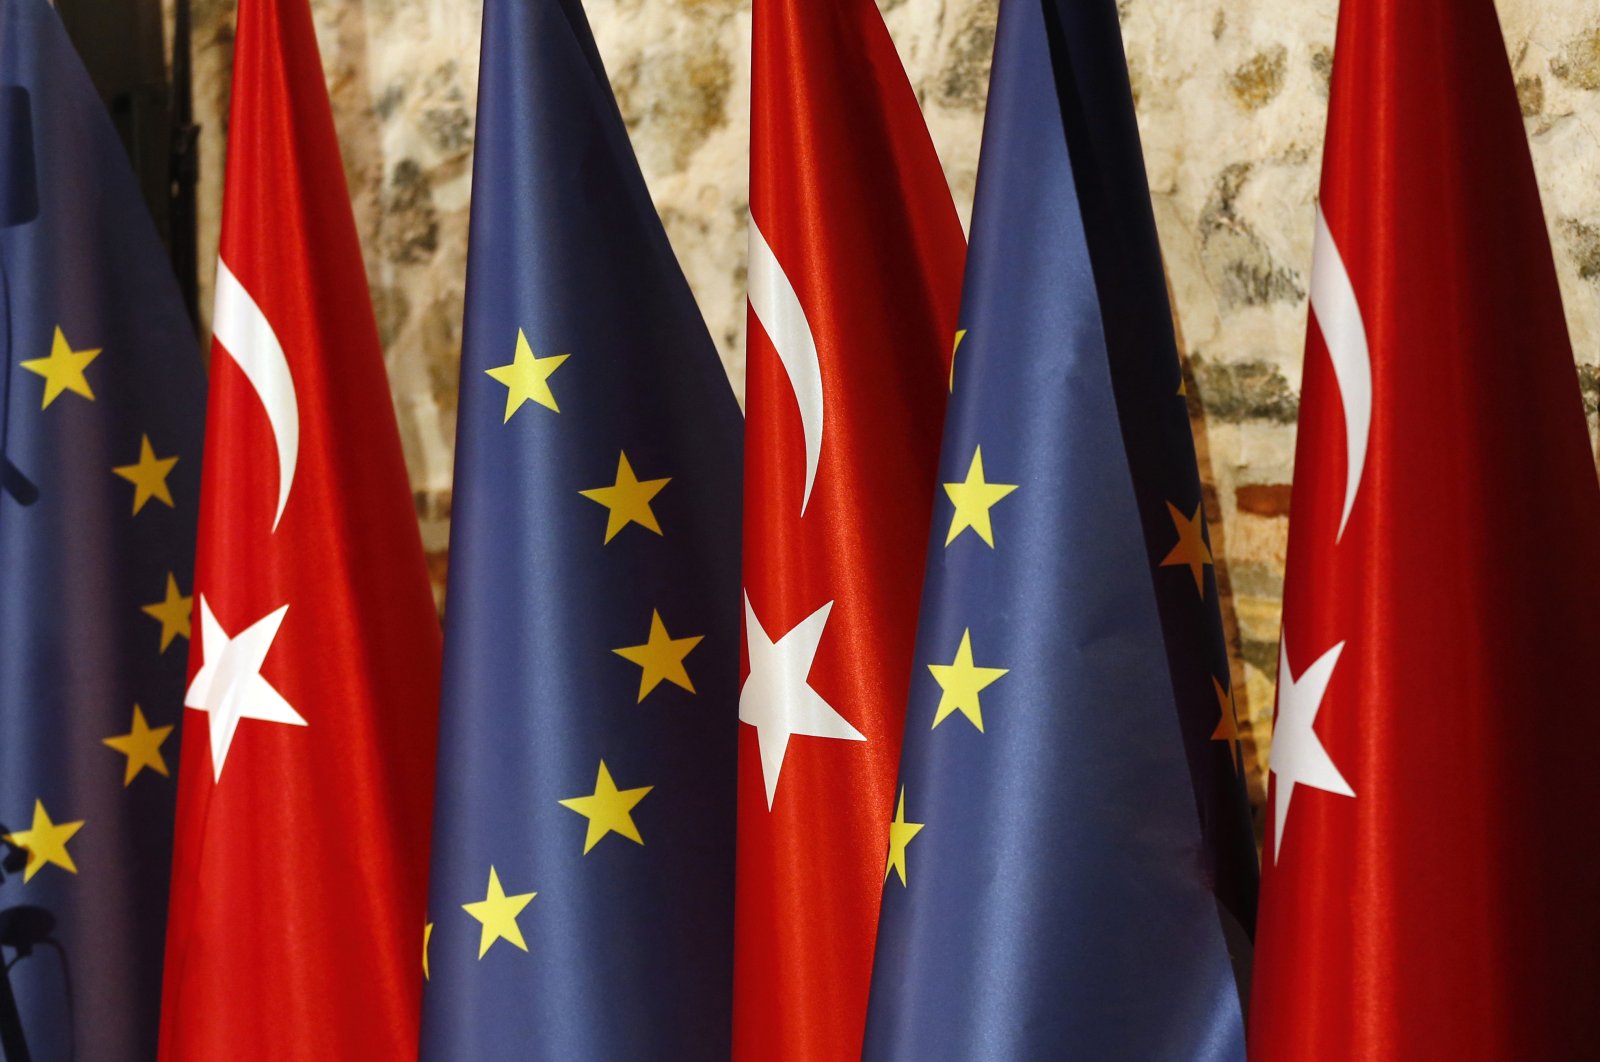 An official adjusts Türkiye and European Union flags prior to the opening session of a high-level meeting between EU and Türkiye, in Istanbul, Thursday, Feb. 28, 2019. (AP File Photo)